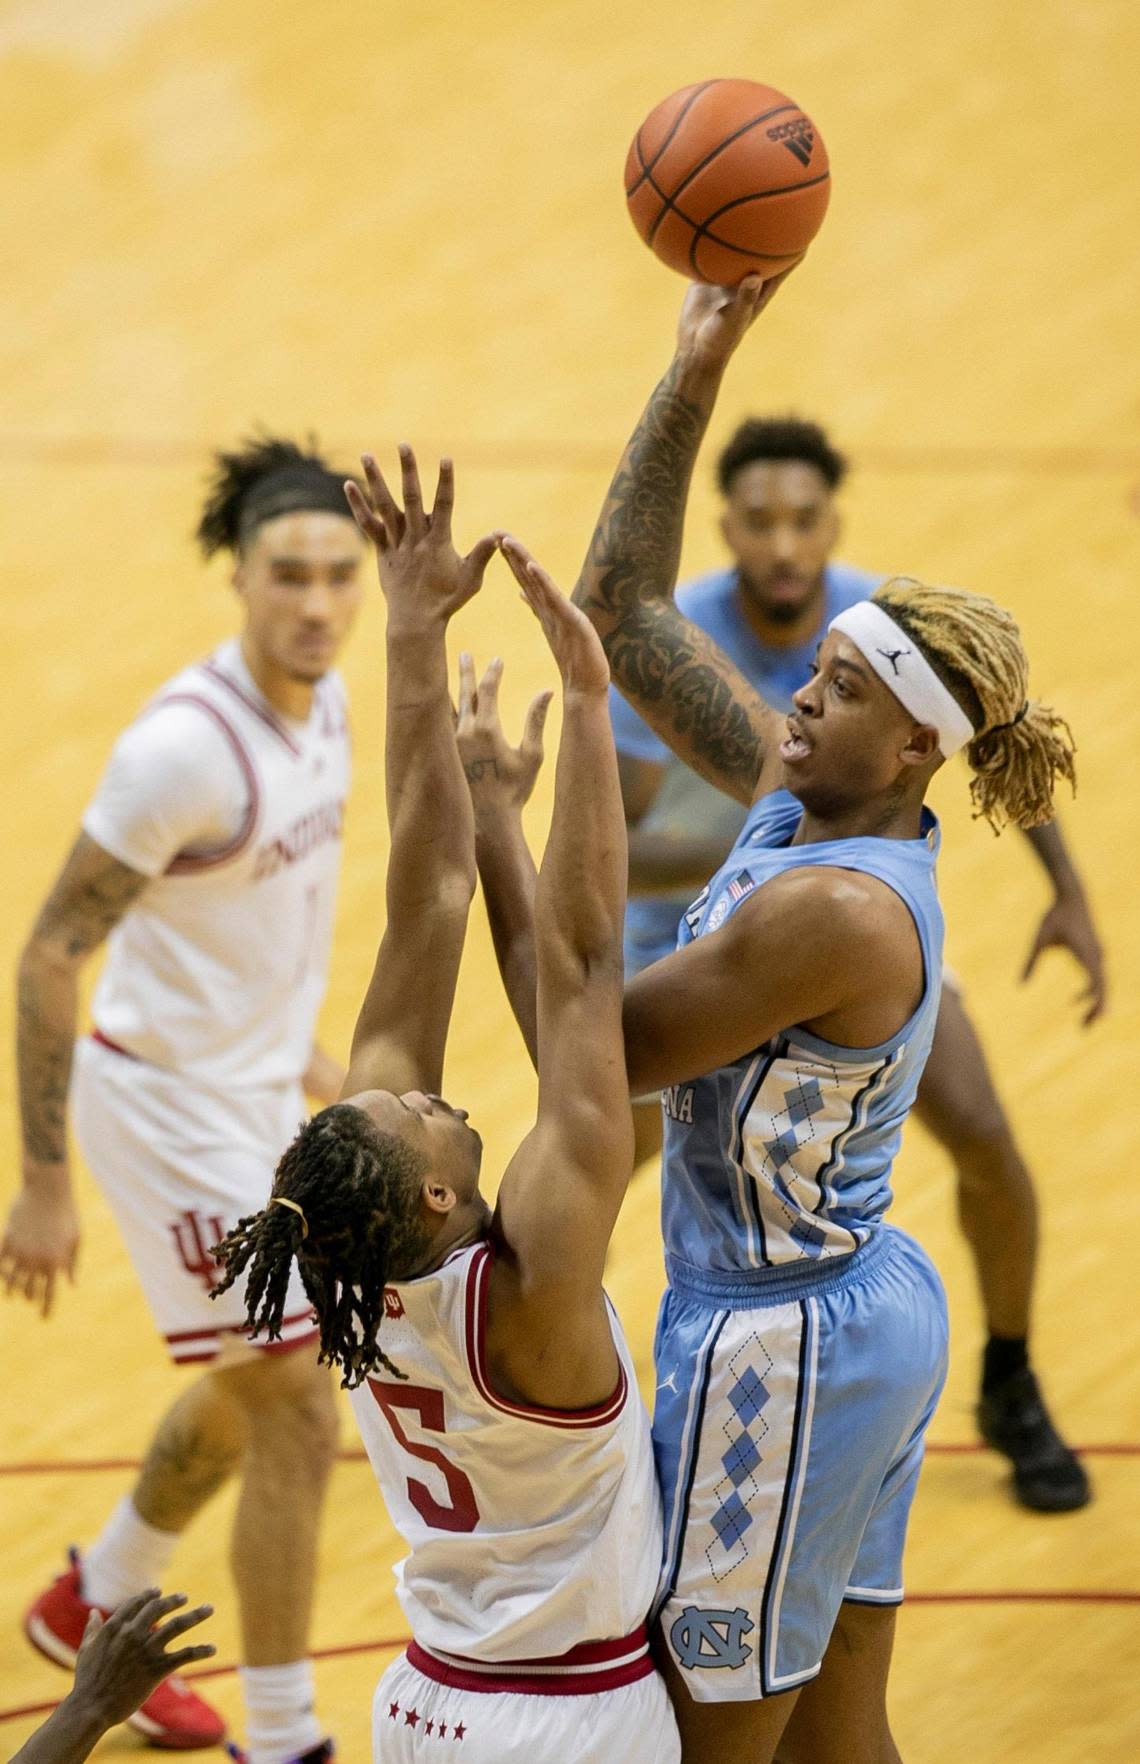 North Carolina’s Armando Bacot (5) puts up a shot against Indiana’s Malik Reneau (5) in the first half on Wednesday, November 30, 2022 at Assembly Hall in Bloomington, IN.